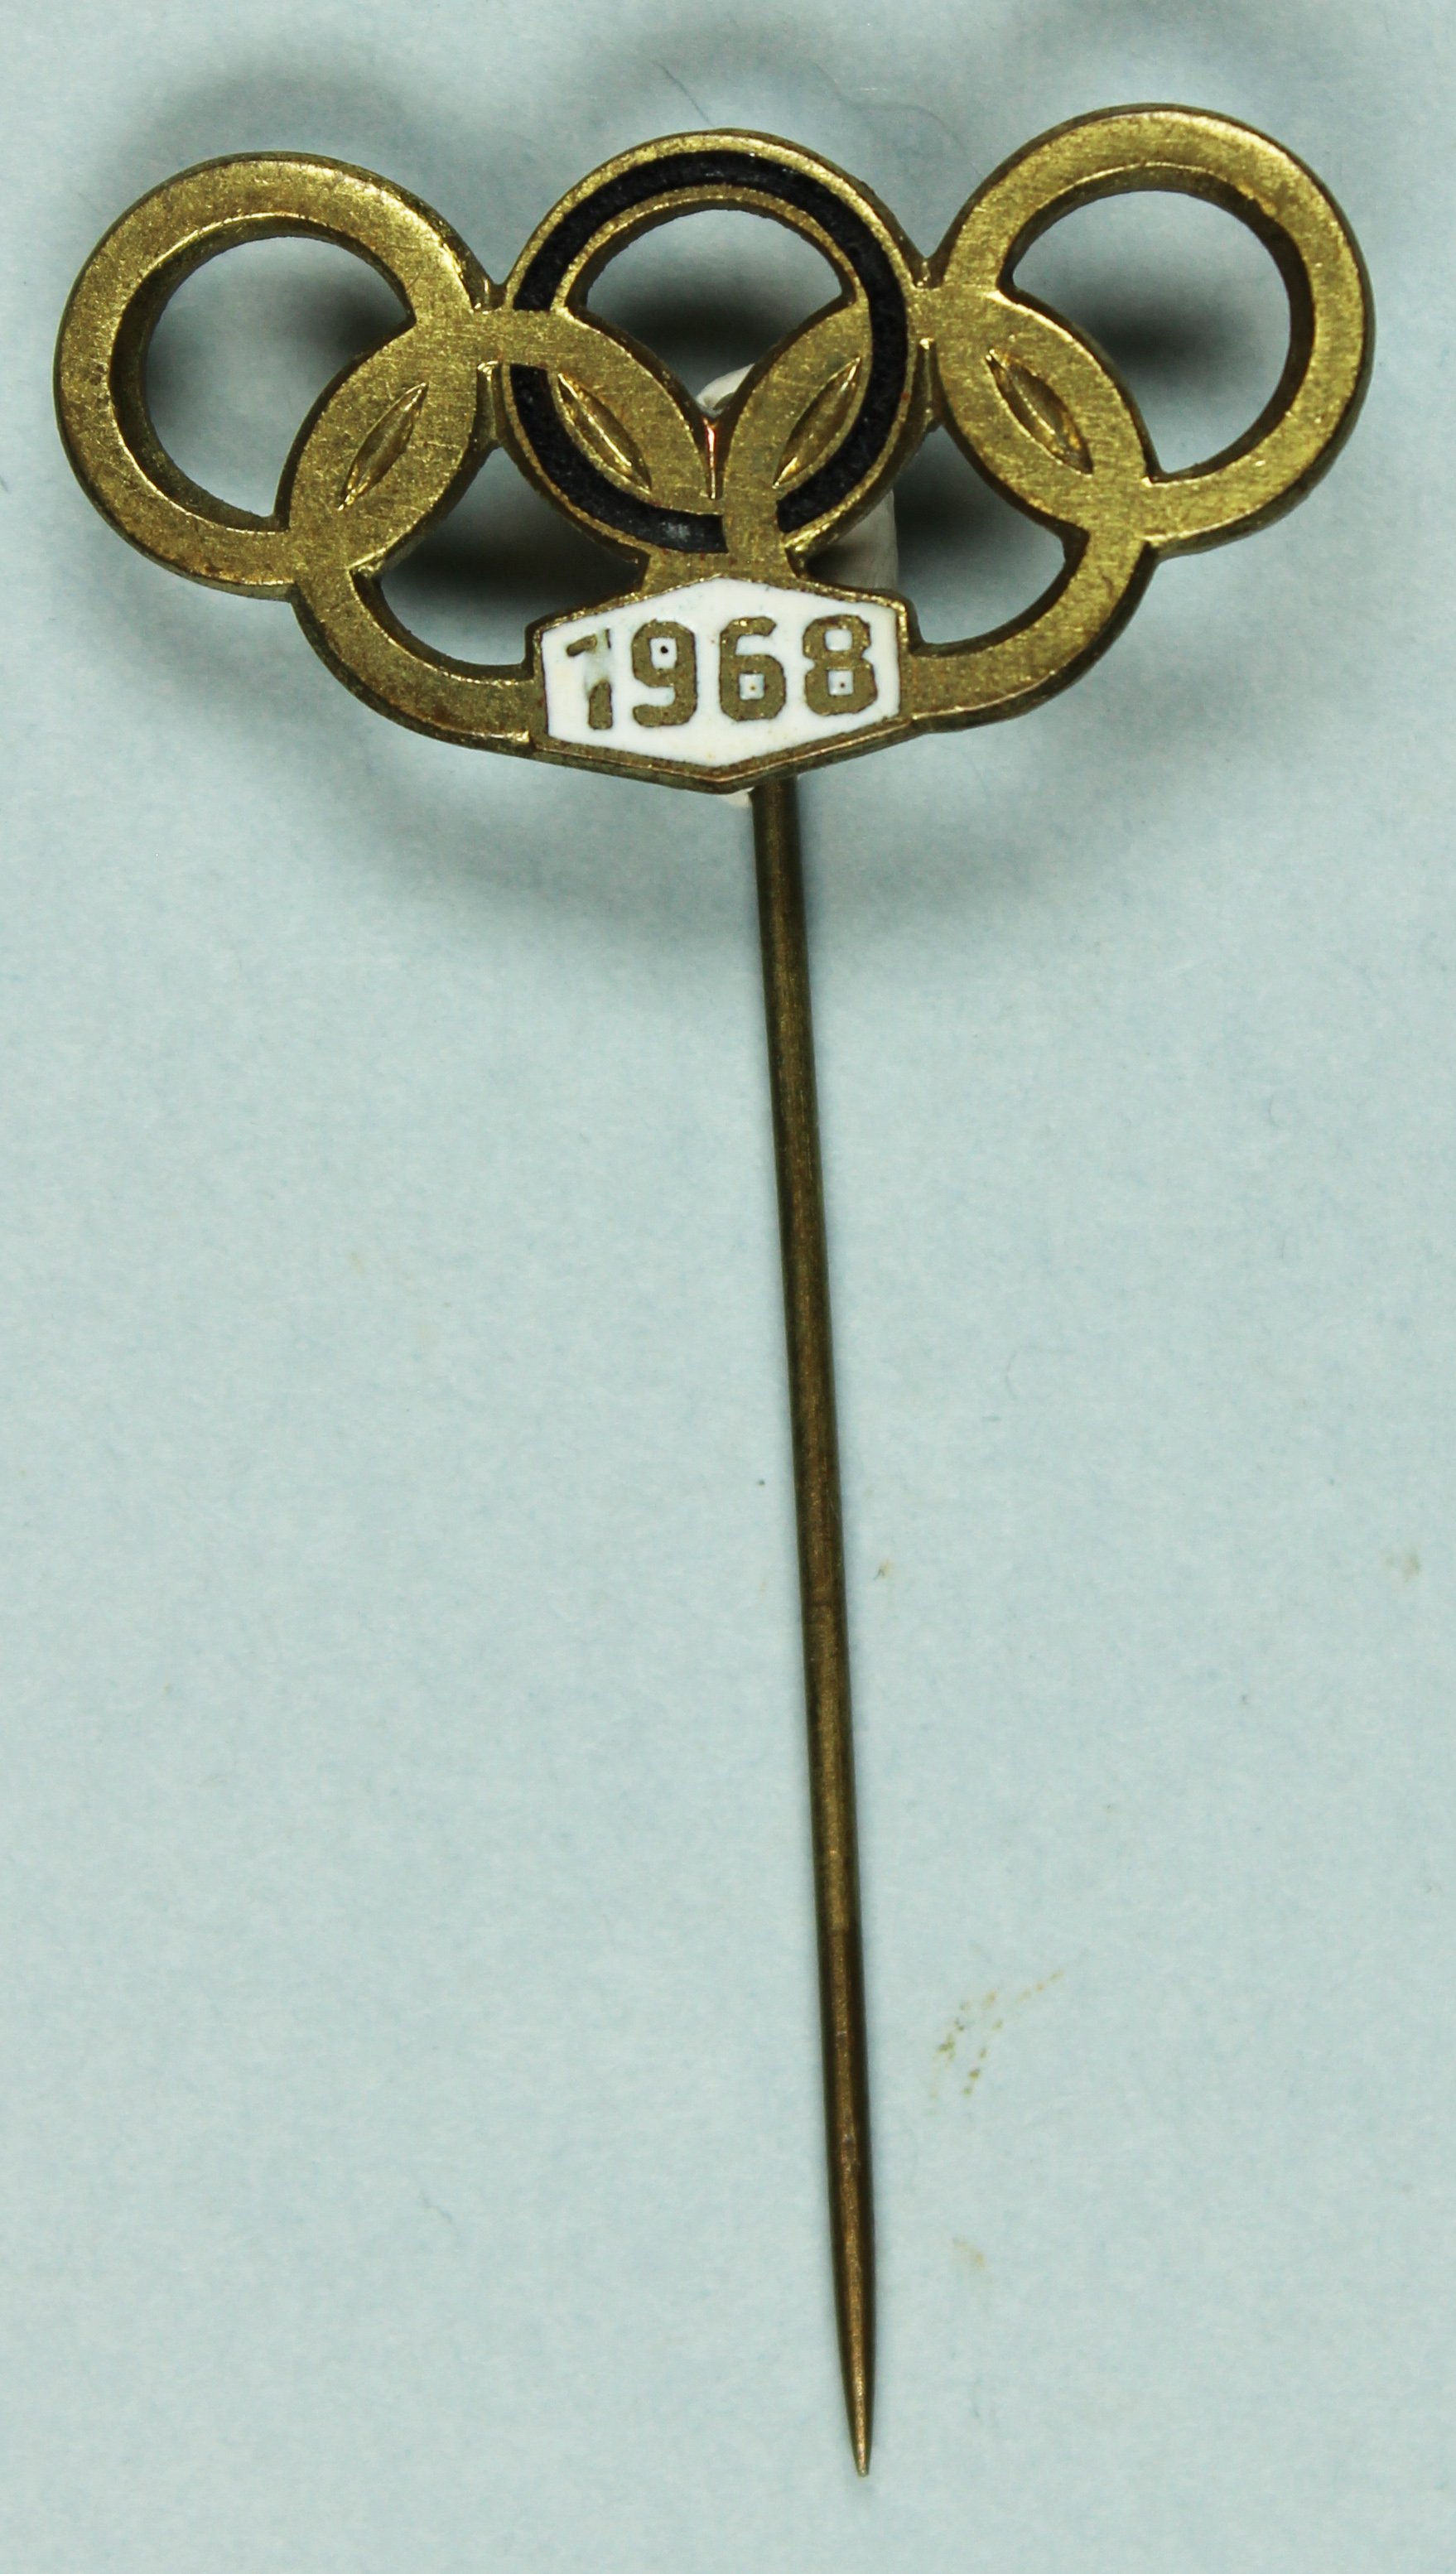 Anstecknadel "Olympia 1968" (Museum Wolmirstedt RR-F)